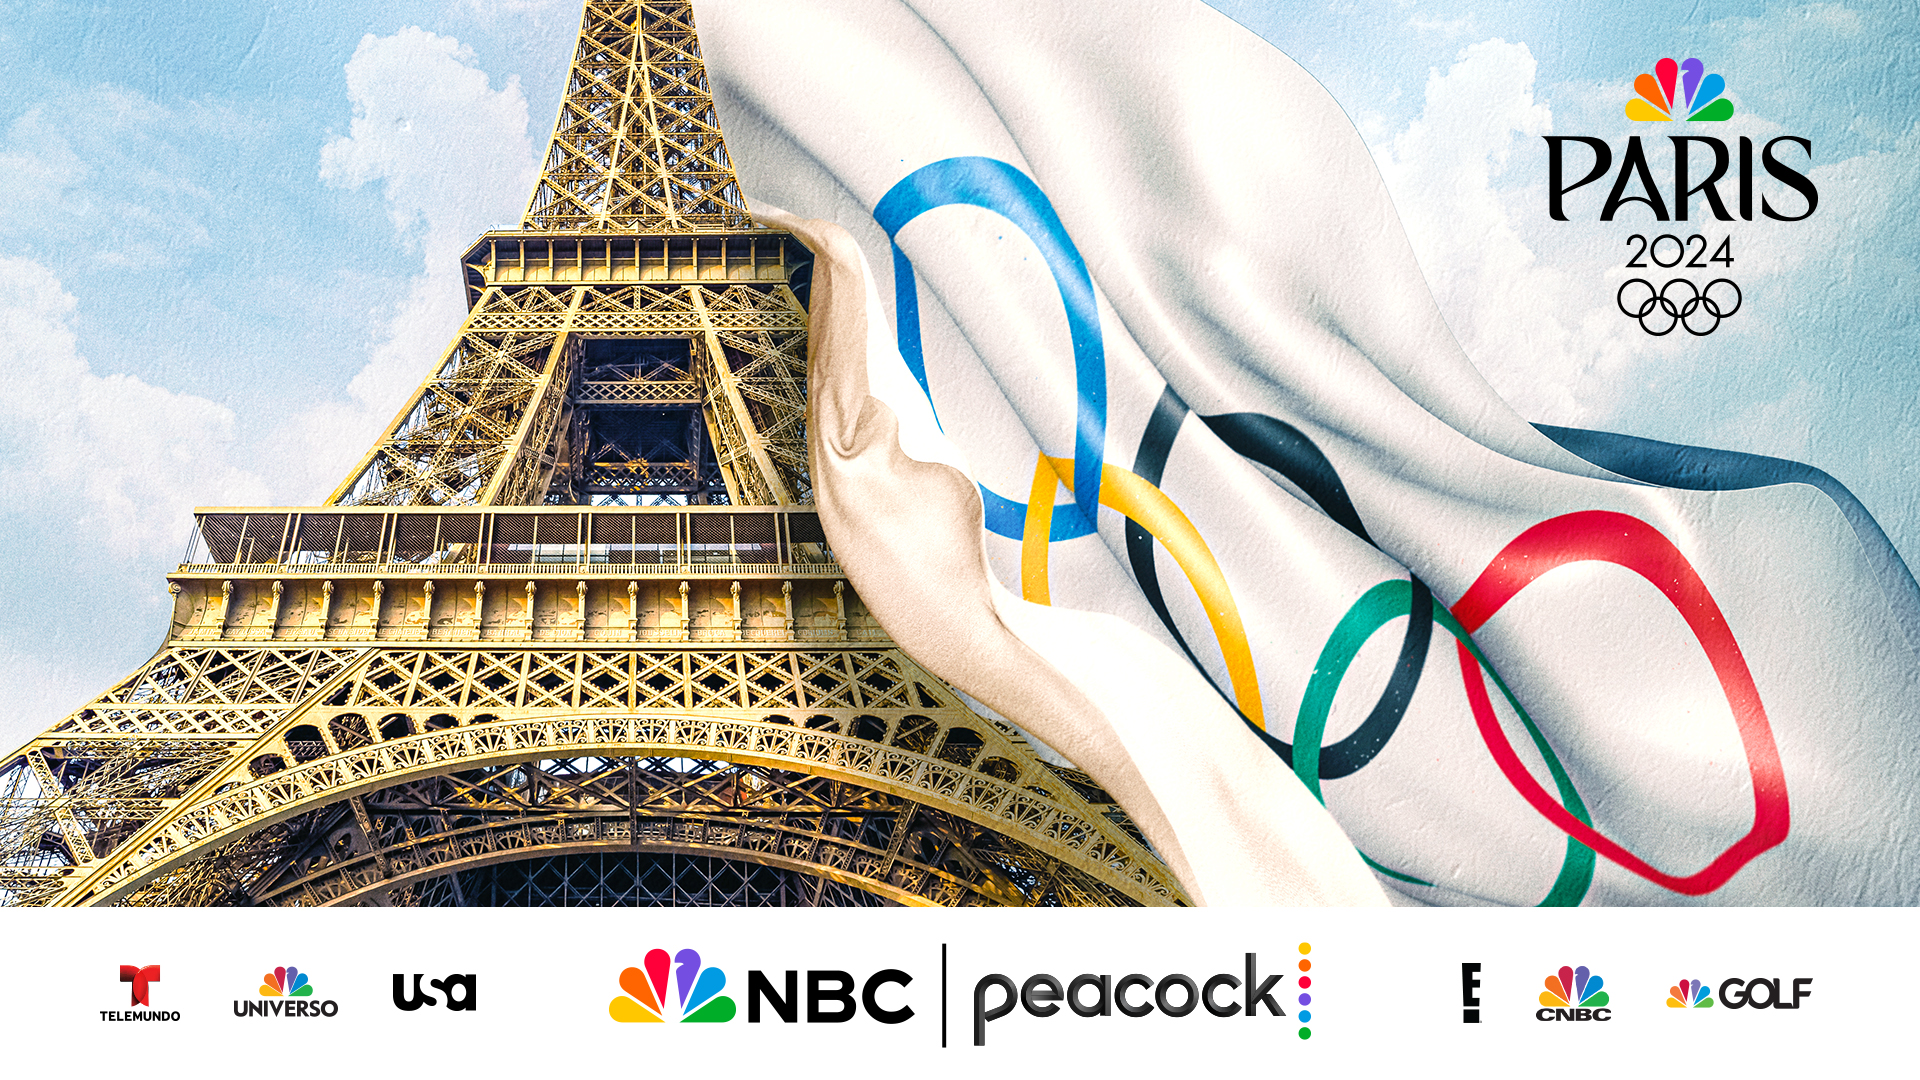 NBC and Peacock to Lead NBCUniversal's Coverage of the Olympic Games Paris  2024